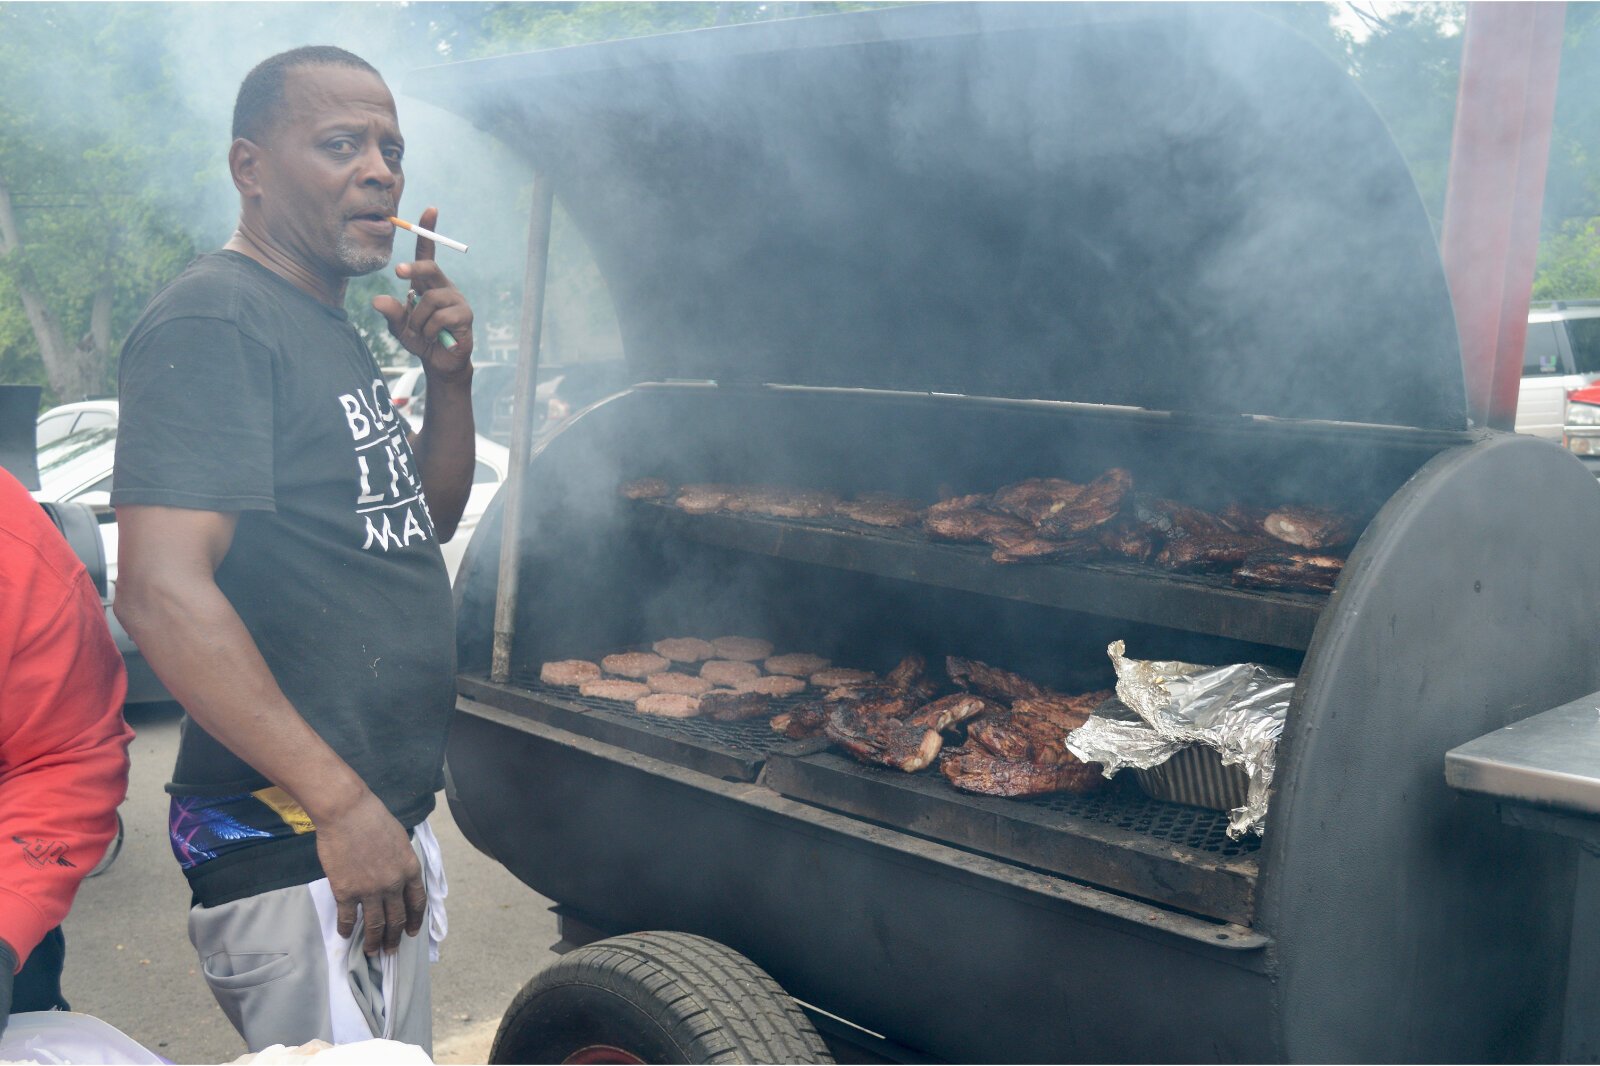 One Man and a Grill was filling the air with the smoke of about a ton of rib tips, hamburgers, chicken, and more. Michael Wilder of Group Violence Intervention and Peace During War says the rally was all about peace smoke, the smoke of BBQ grills.